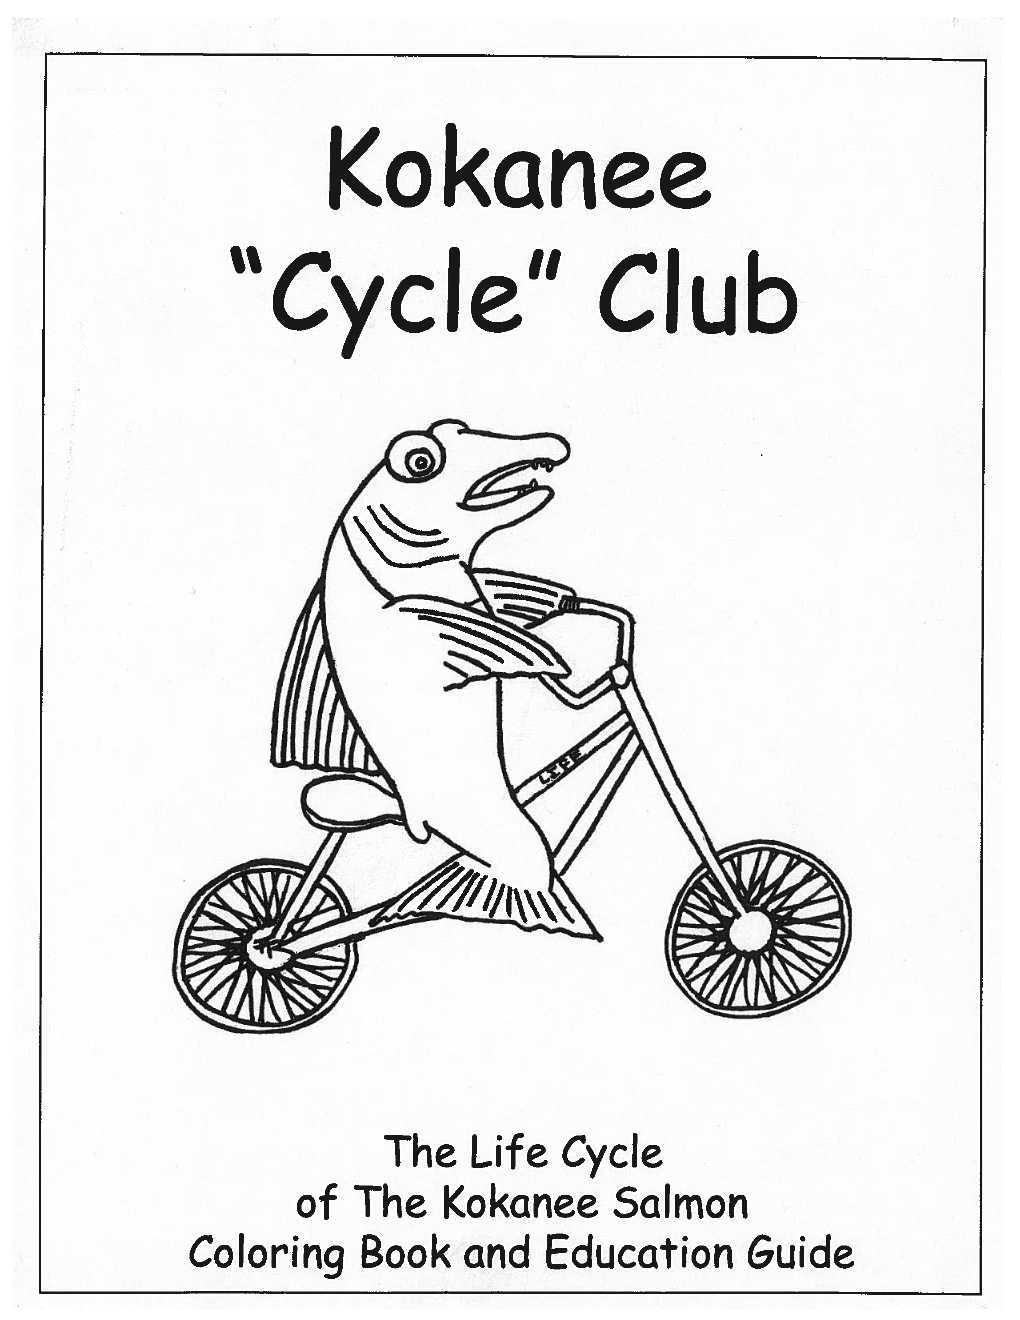 The Life Cycle of the Kokariee Salmon Coloring Book And